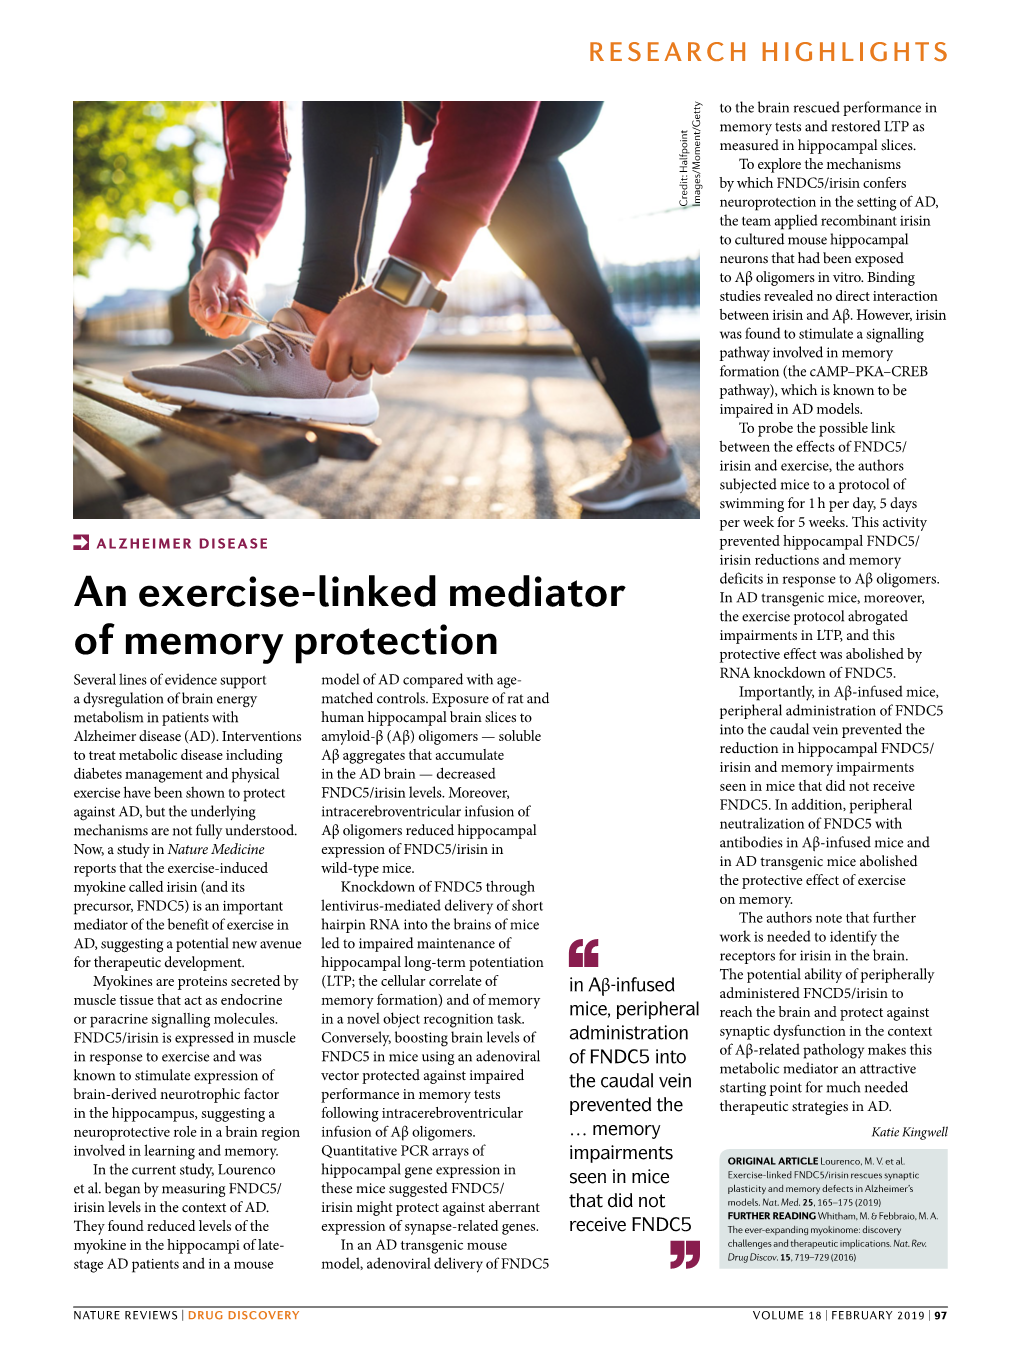 An Exercise-Linked Mediator of Memory Protection